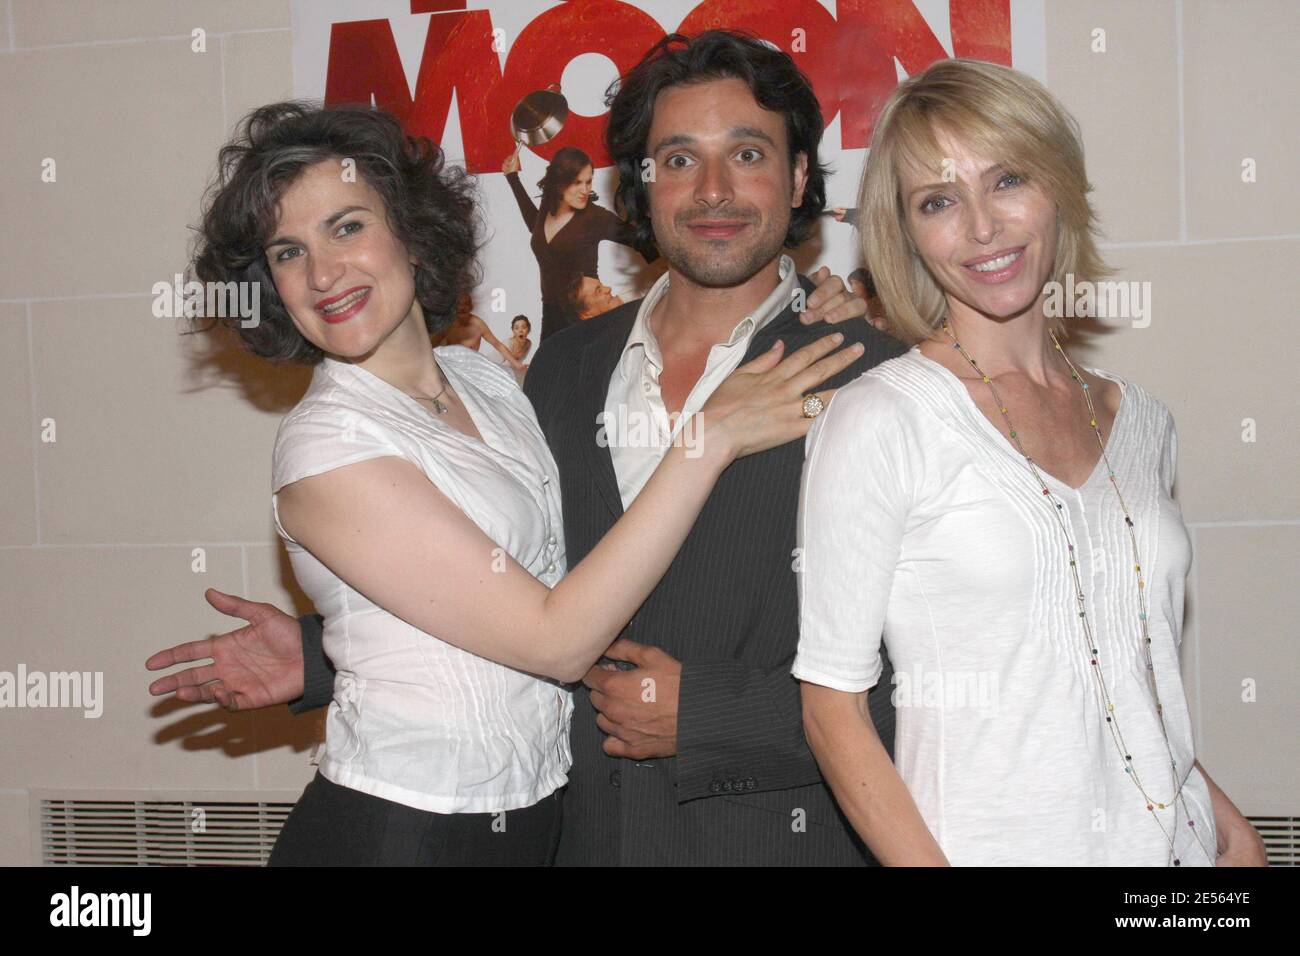 French actors and cast member Armelle Lesniak, Bruno Salomone and Tonya  Kinzinger attend the premiere of 'Fool moon' held at 'Le Senat' in Paris,  France on July 4, 2008. Photo by Benoit